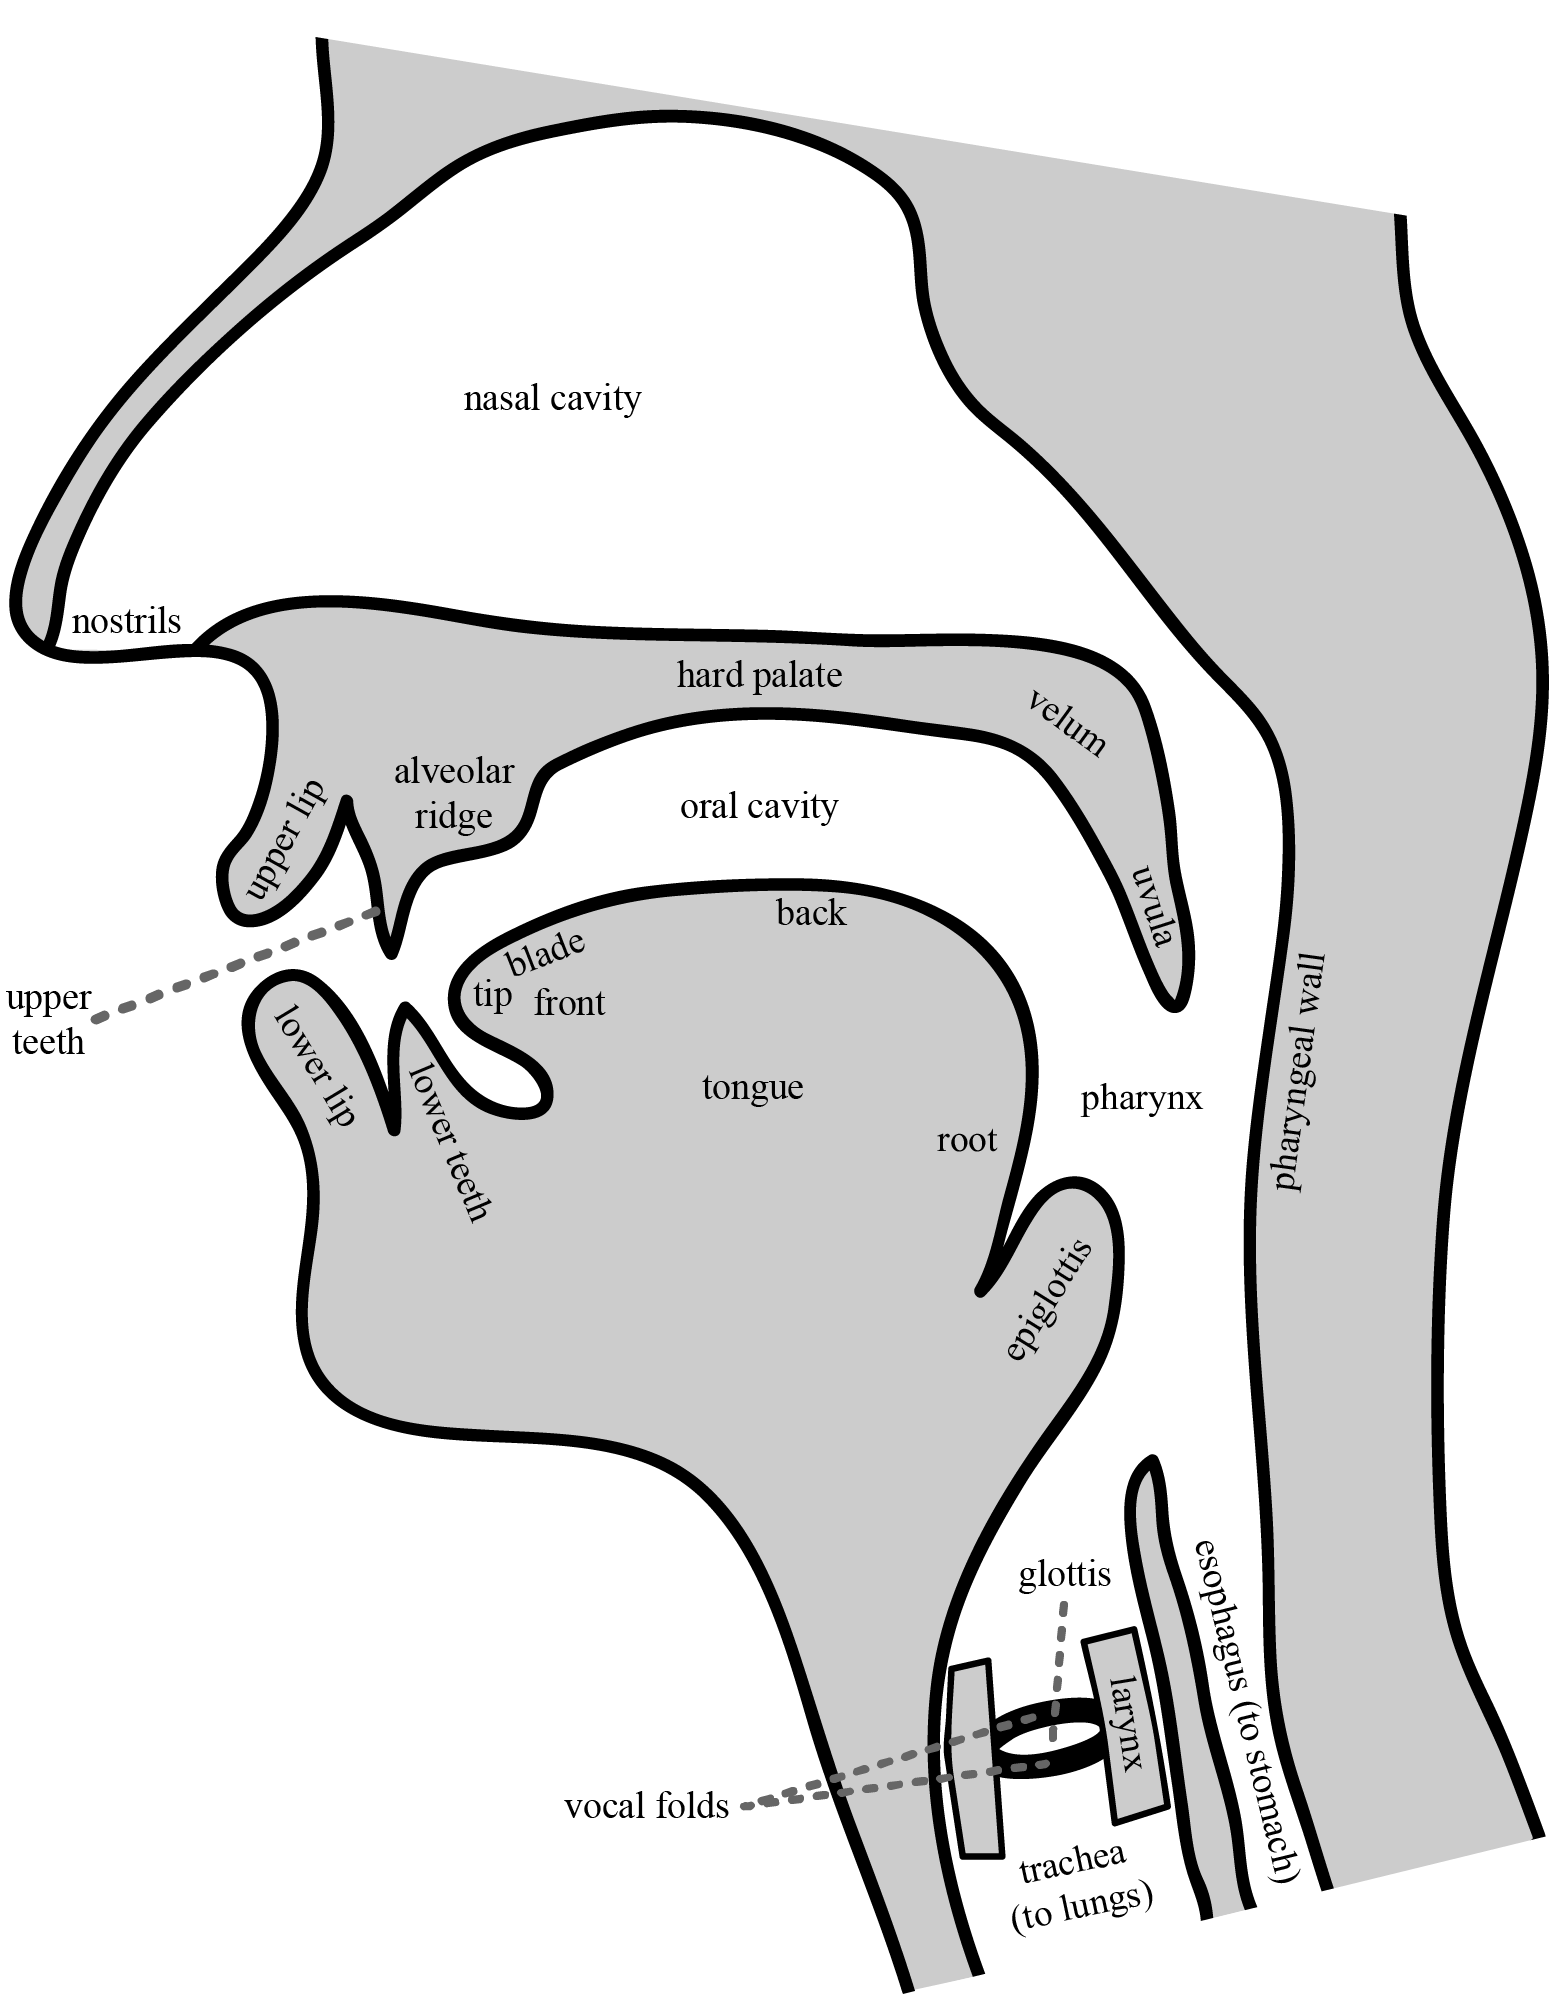 Midsagittal view of the vocal tract, facing left, with various body parts labelled.